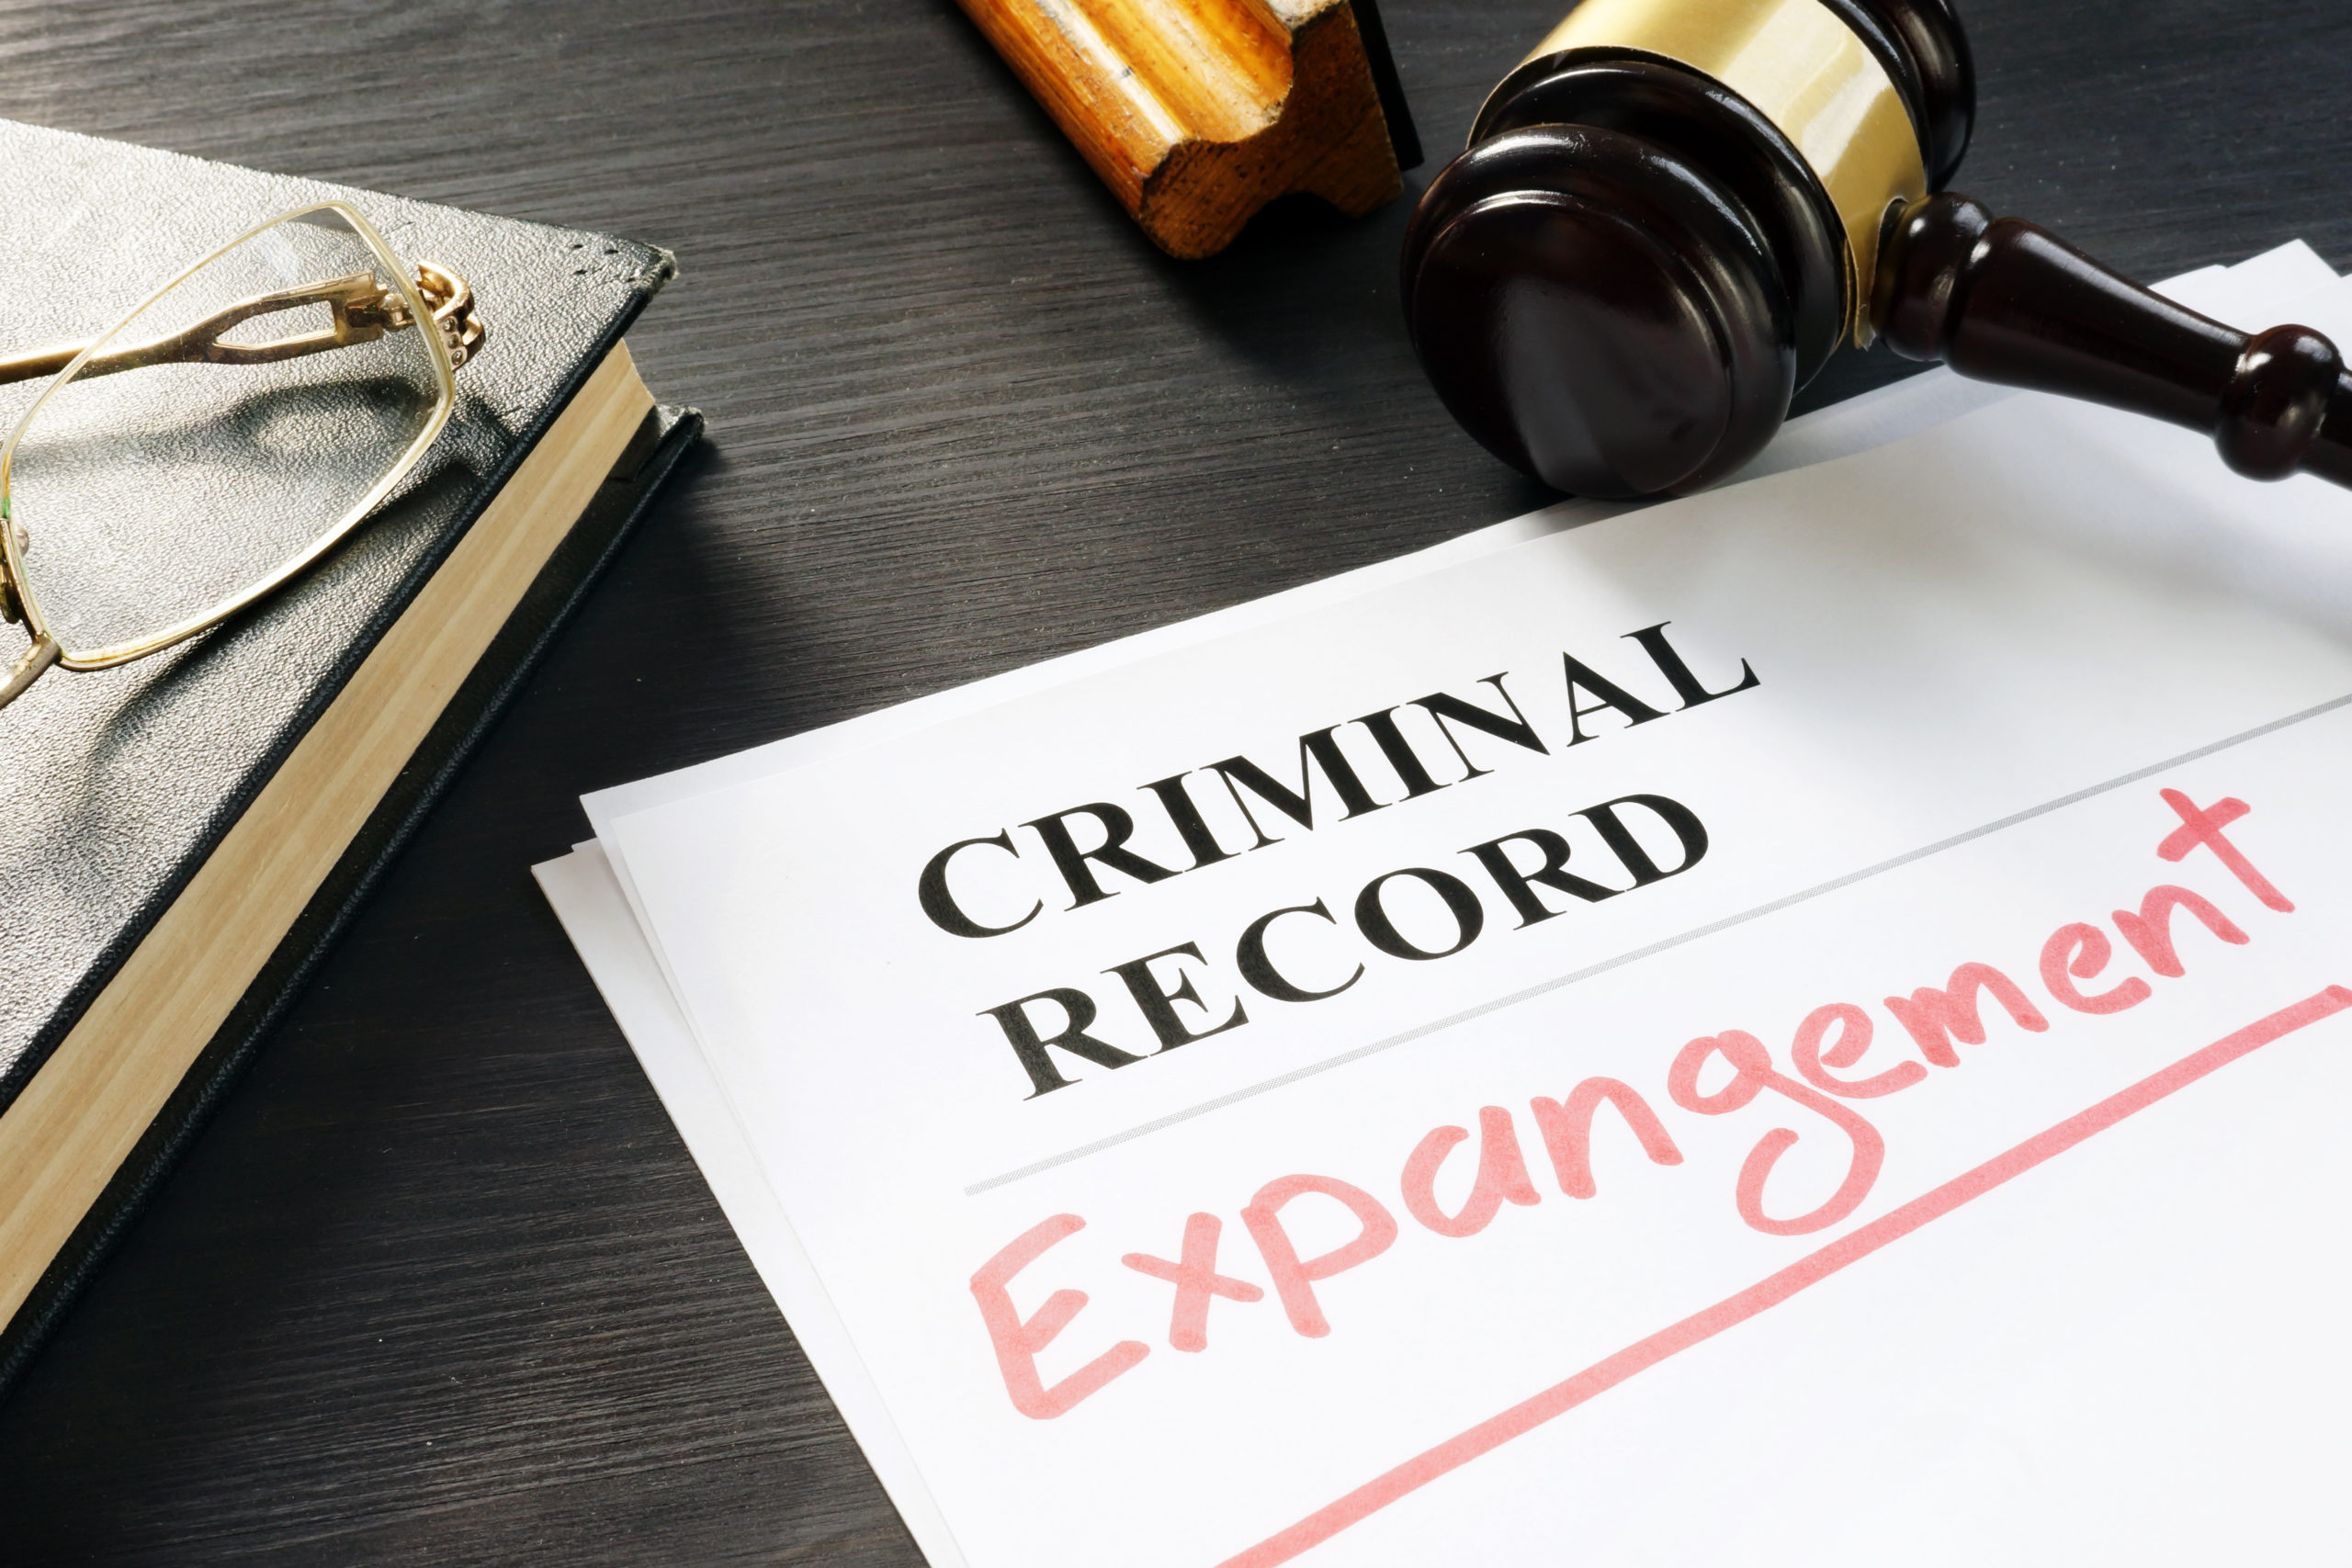 The legal remedy of an expungement will permanently remove a charge or conviction.